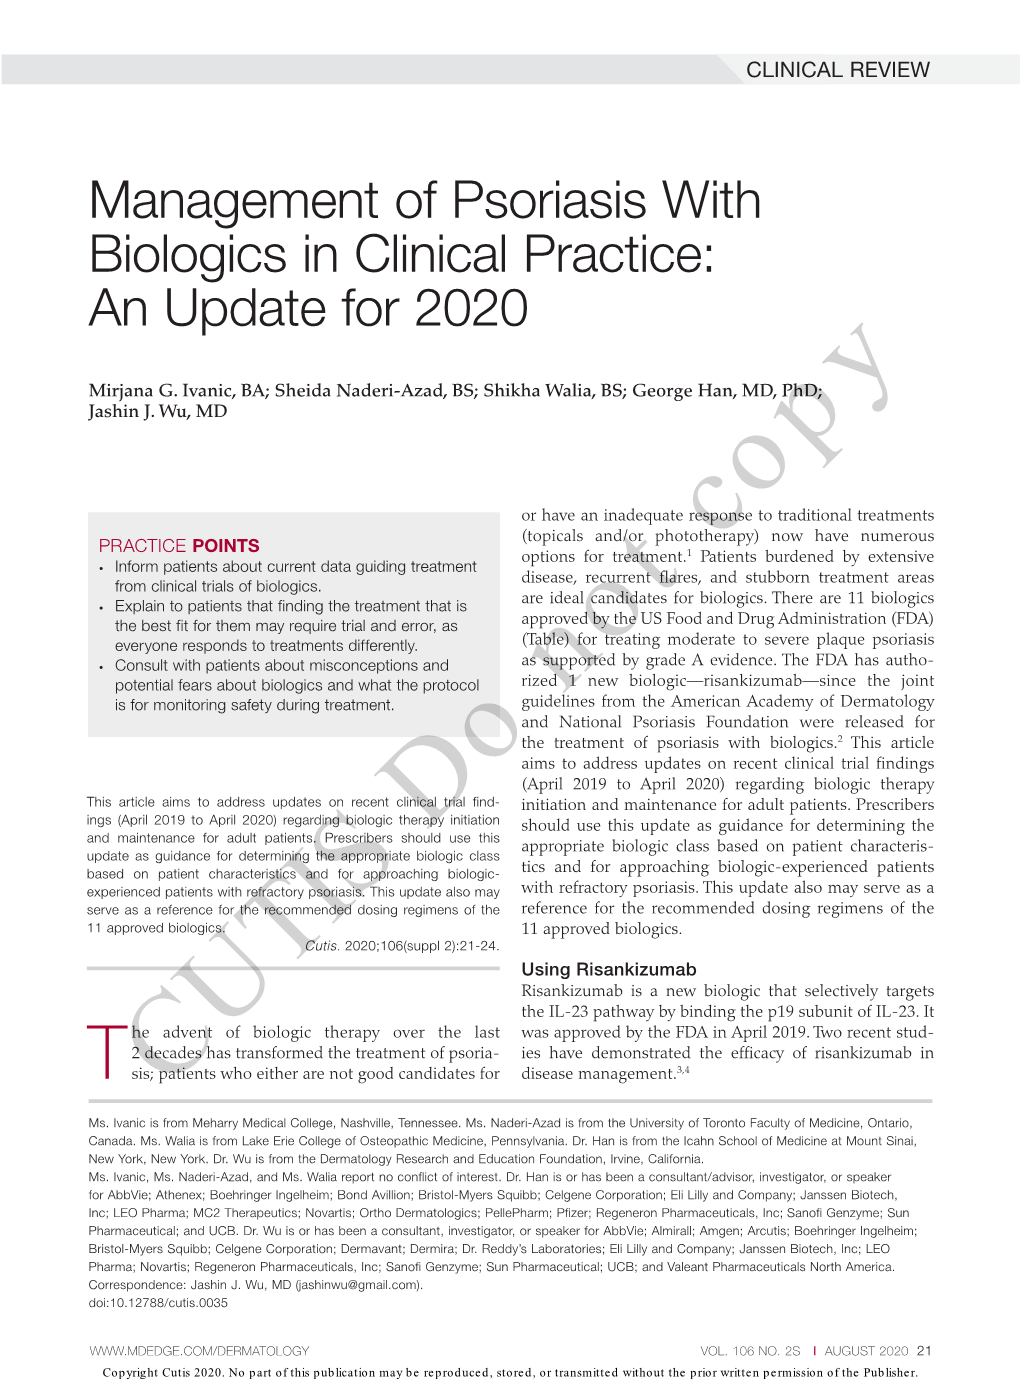 Management of Psoriasis with Biologics in Clinical Practice: an Update for 2020